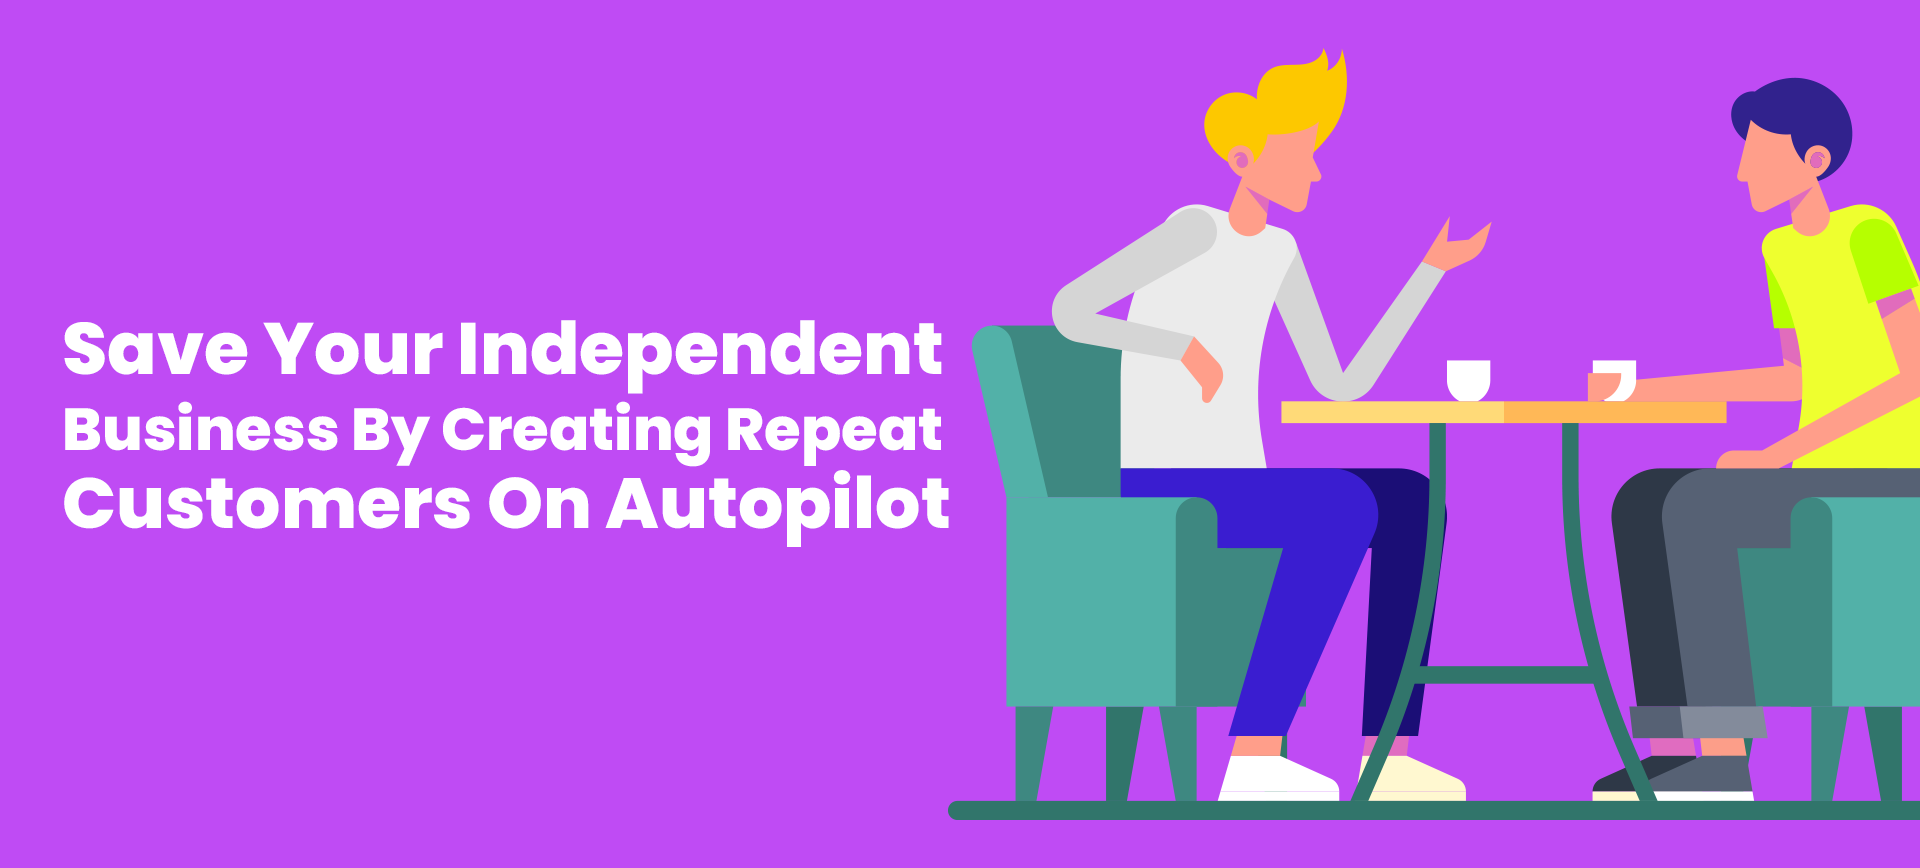 Save Your Independent Business By Creating Repeat Customers On Autopilot